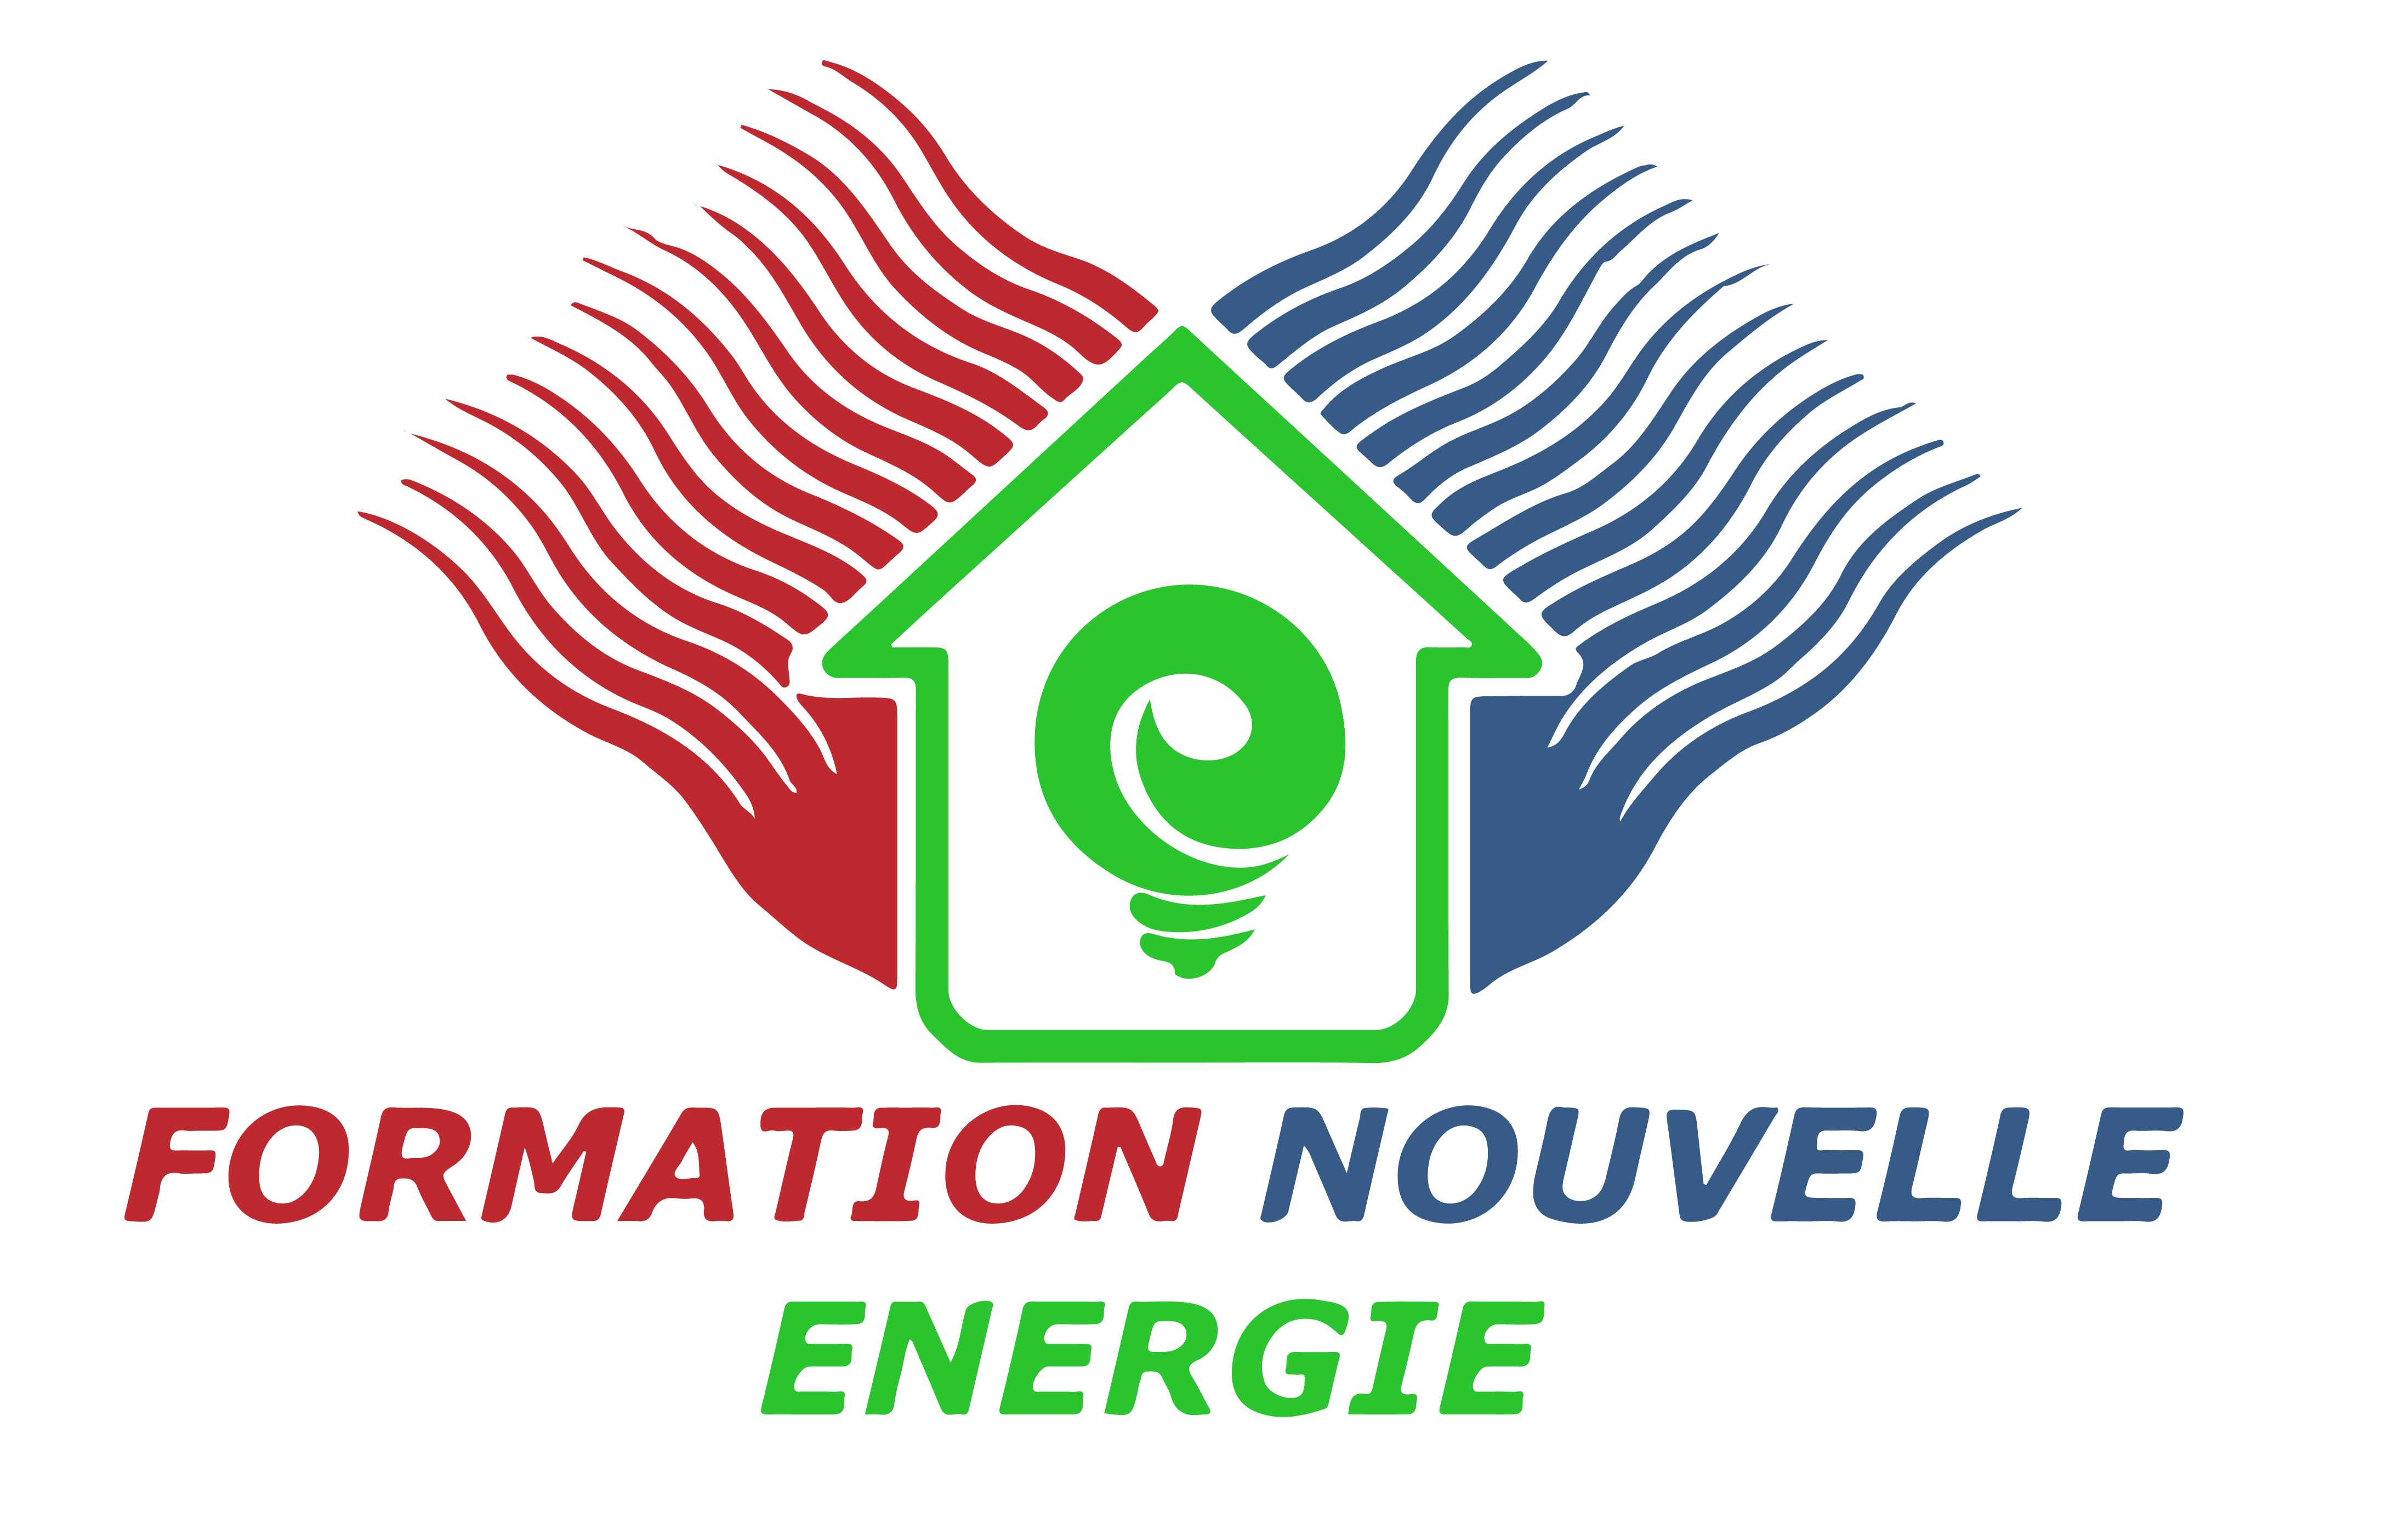 Formation Nouvelle Energie